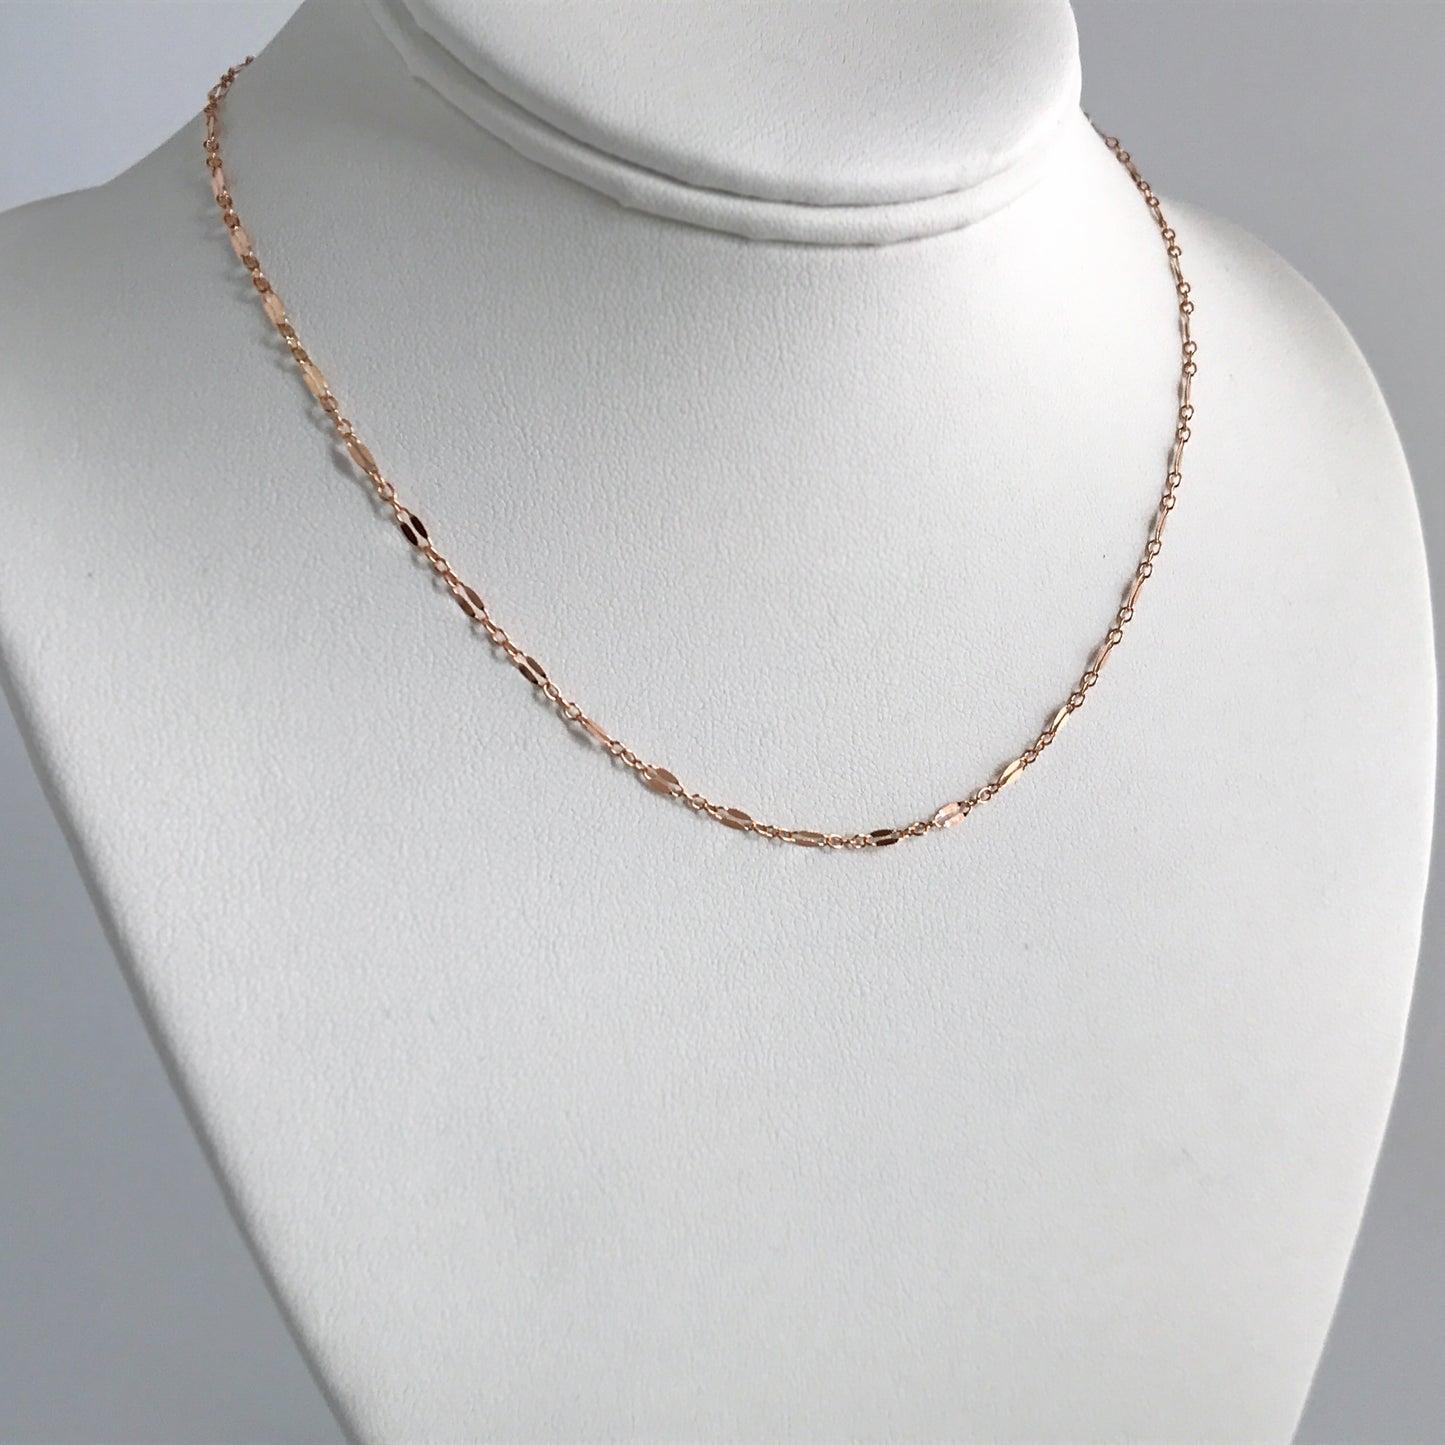 Dainty Lace Chain Rose Gold Choker Necklace